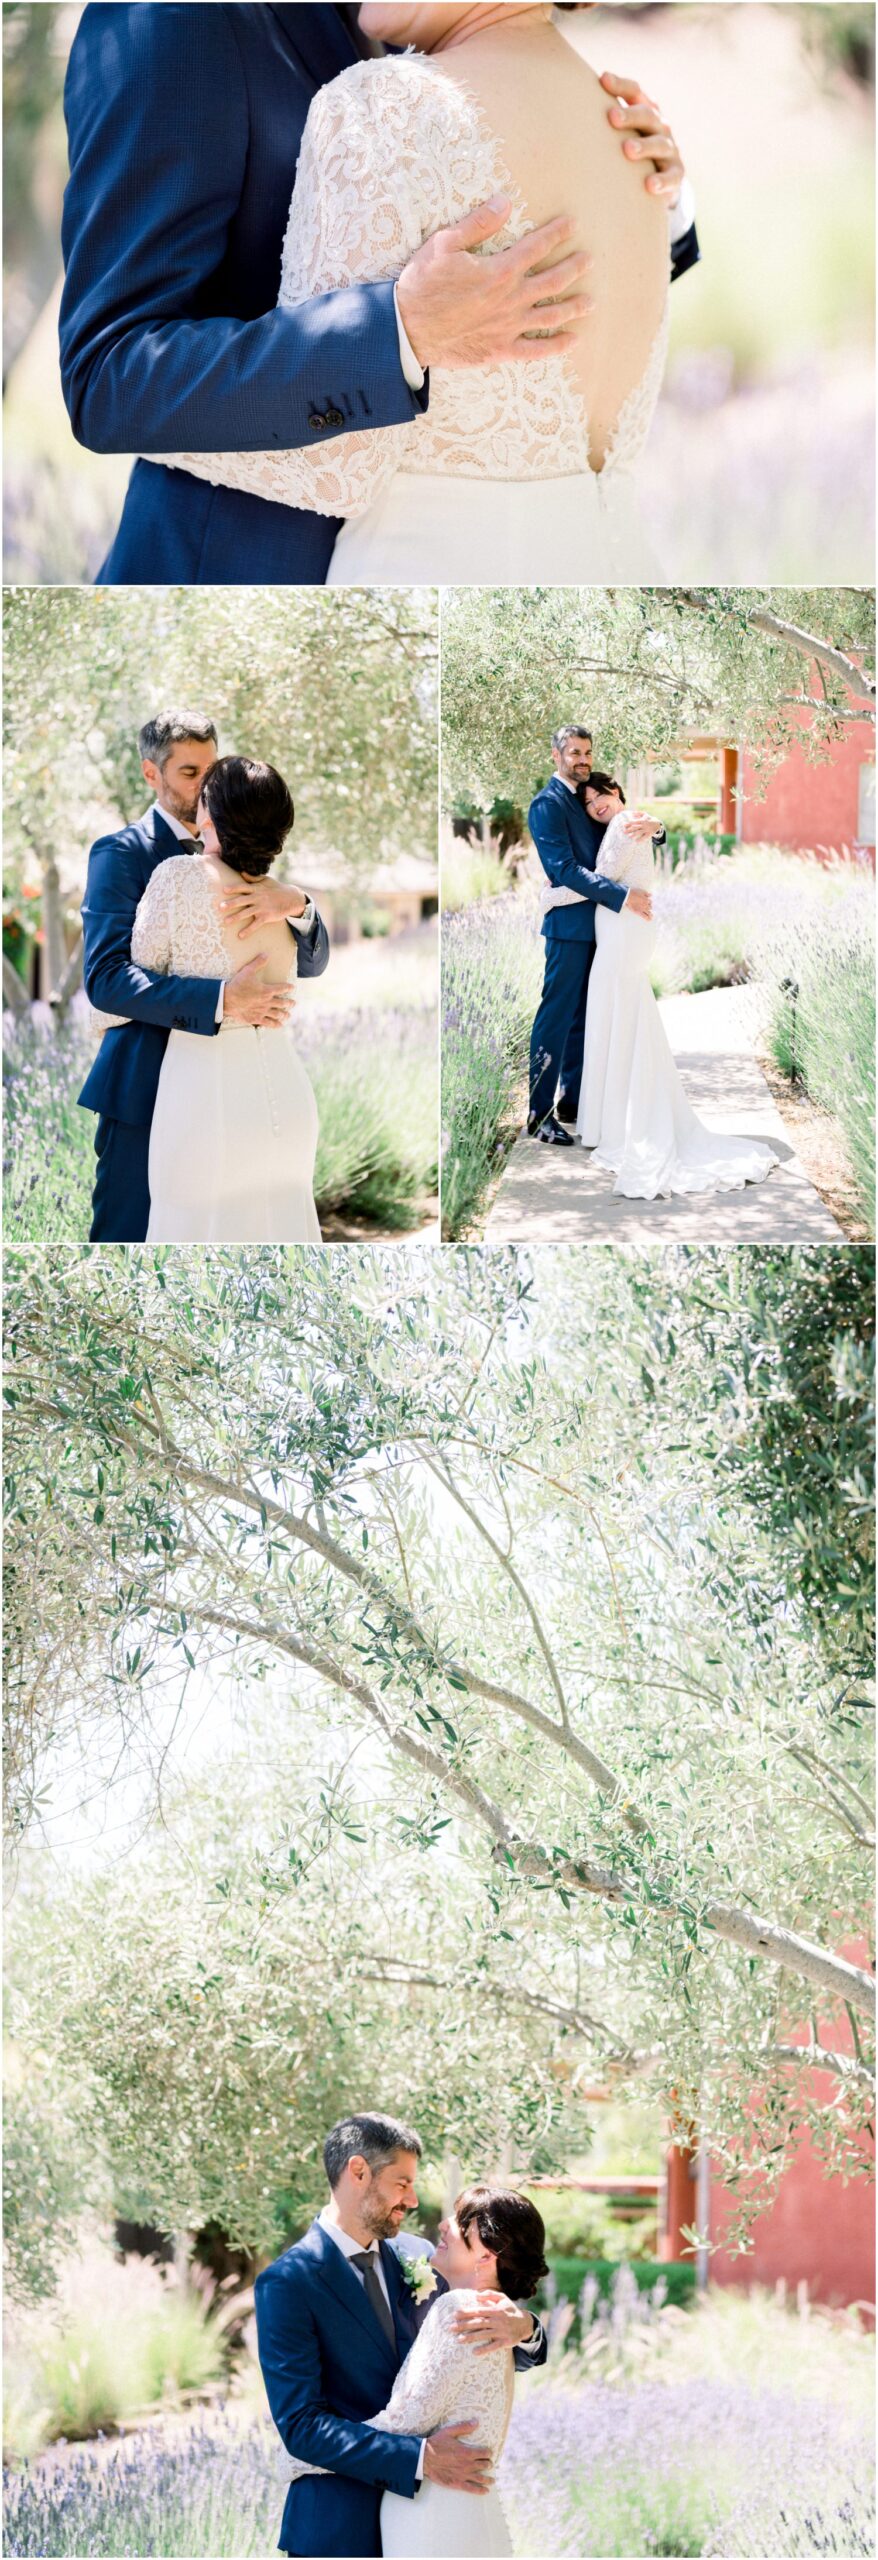 bride and groom in front of trees and lavender hugging